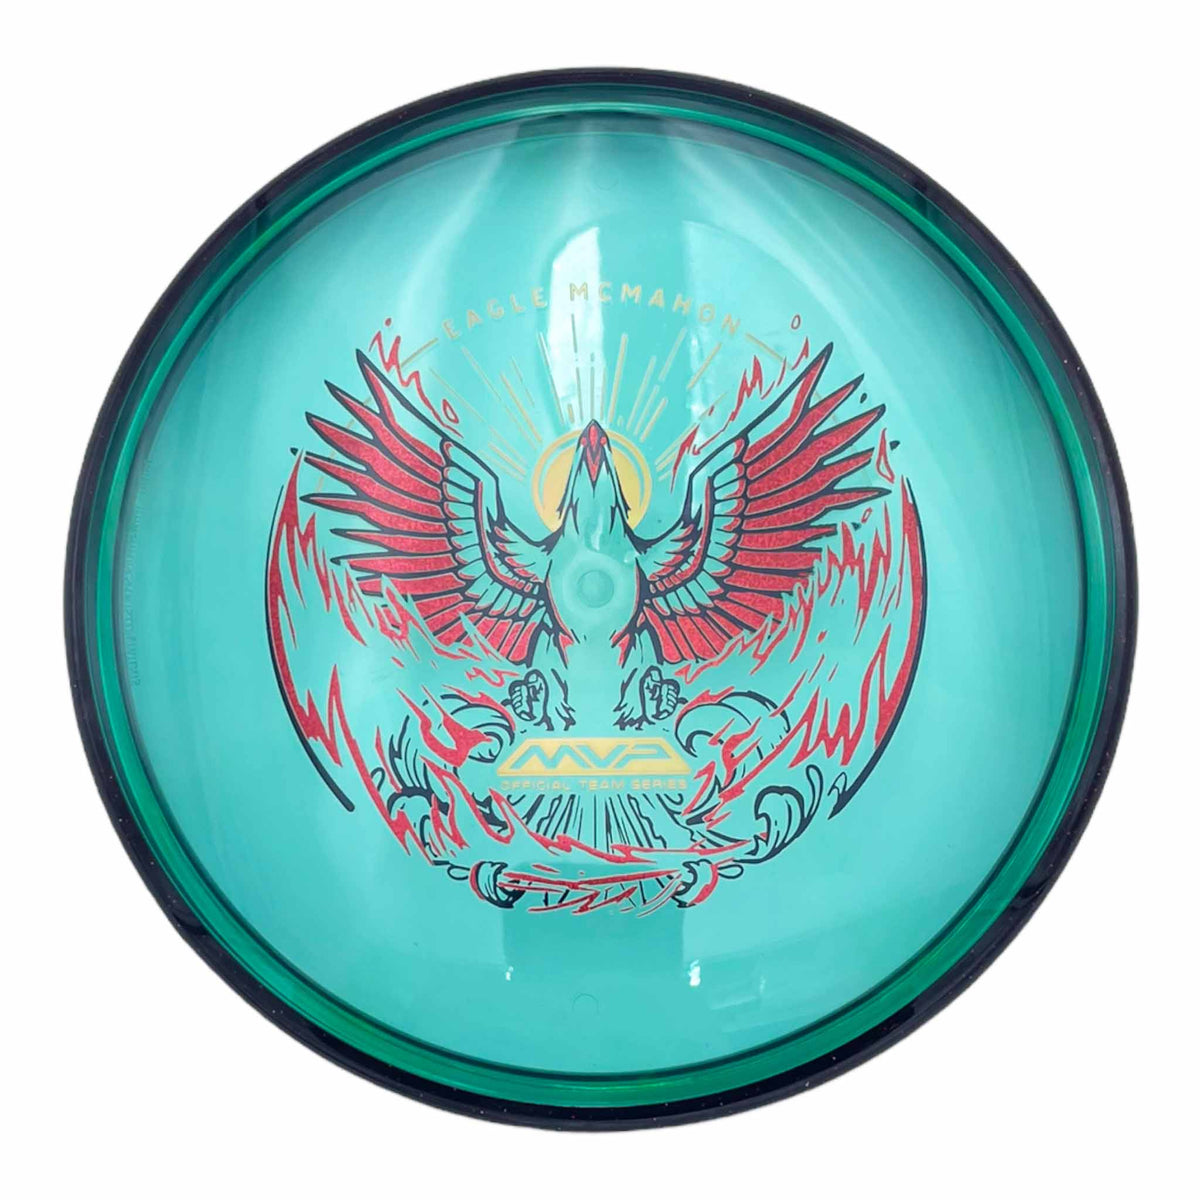 Axiom Discs Prism Proton Eagle McMahon Envy putter and approach - Teal / Dark Red